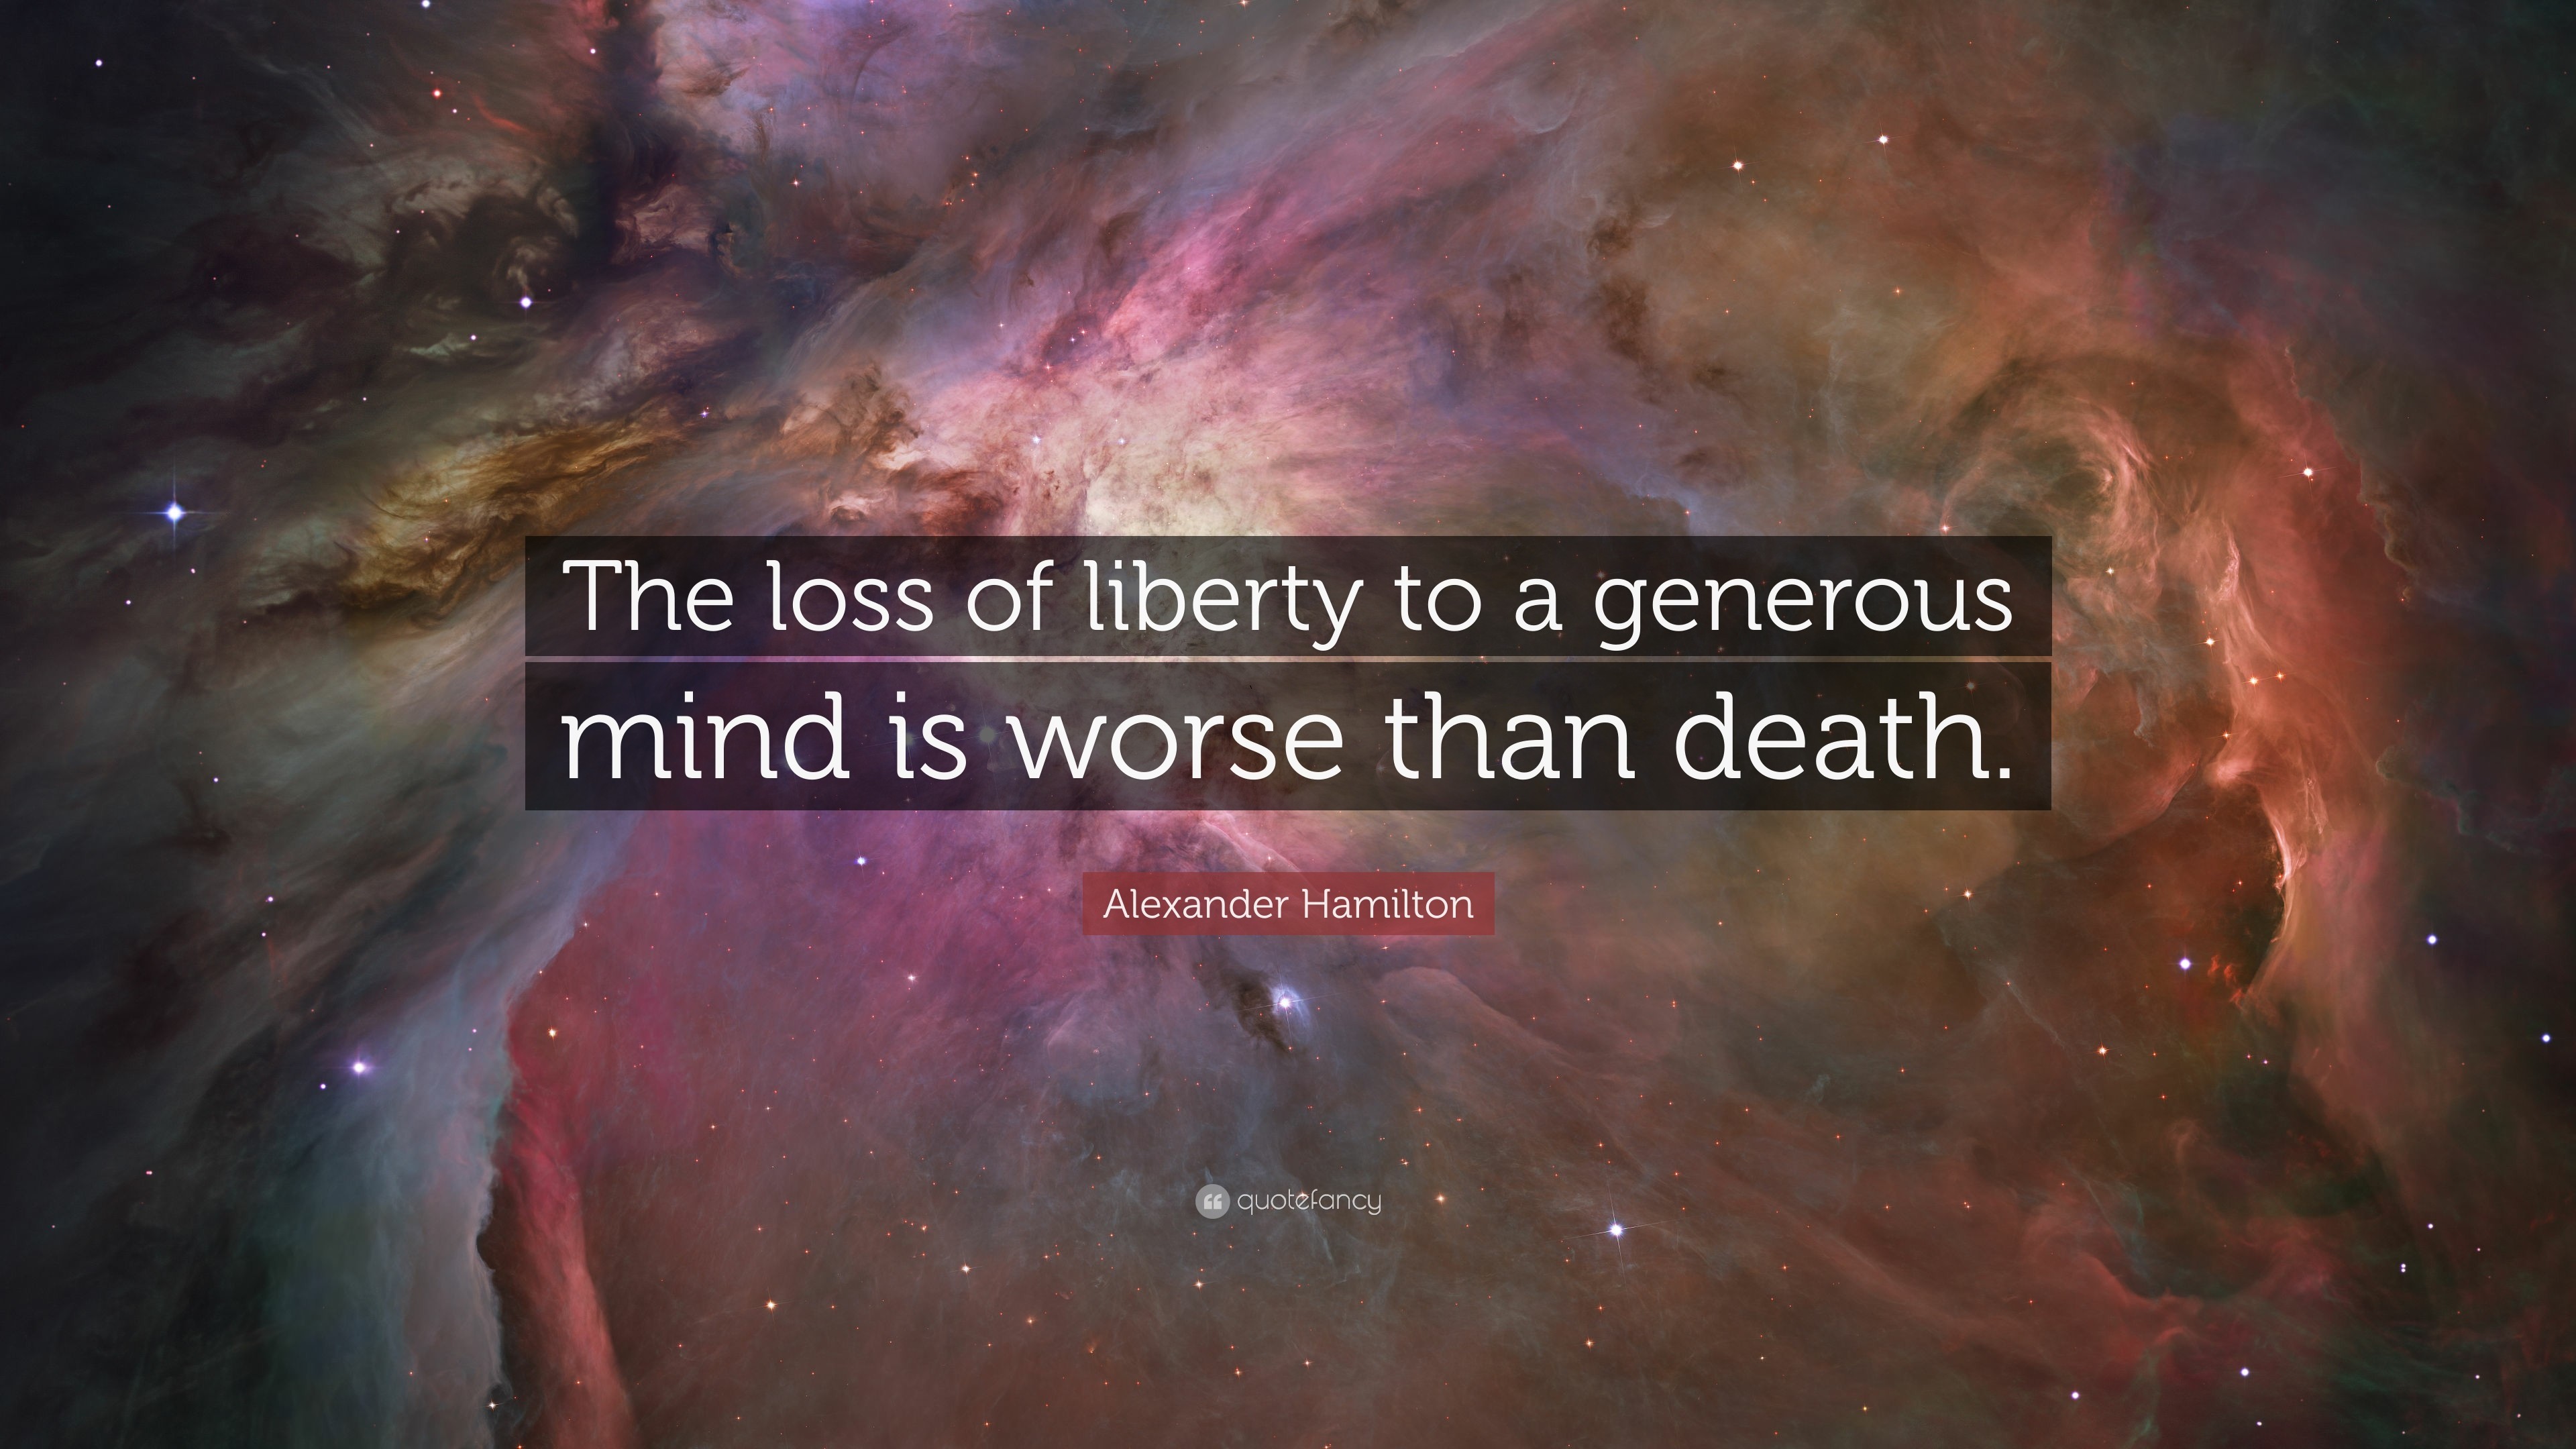 3840x2160 Alexander Hamilton Quote: “The loss of liberty to a generous mind is worse  than